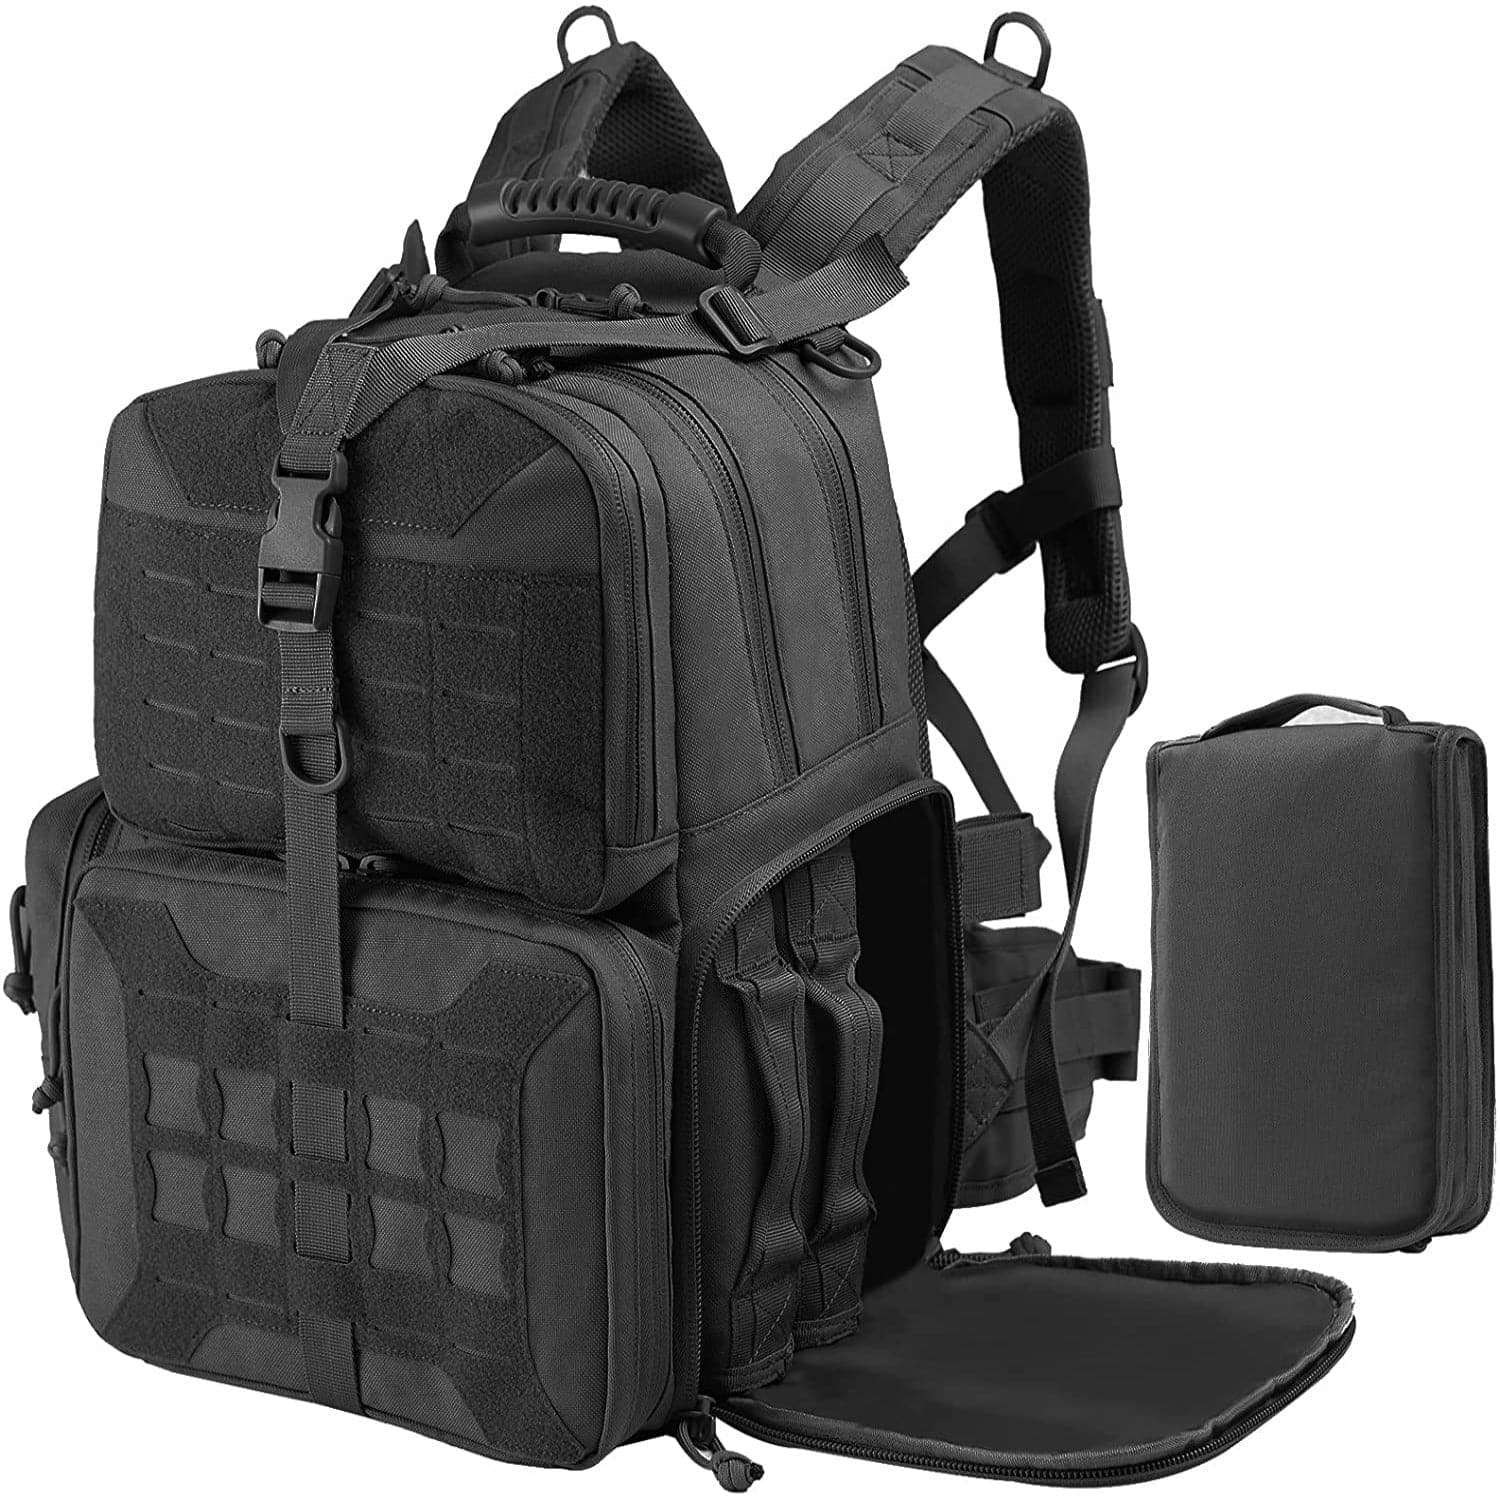 Activity 3 Pistol Carrying Case Tactical Ammo Range Bag Backpack